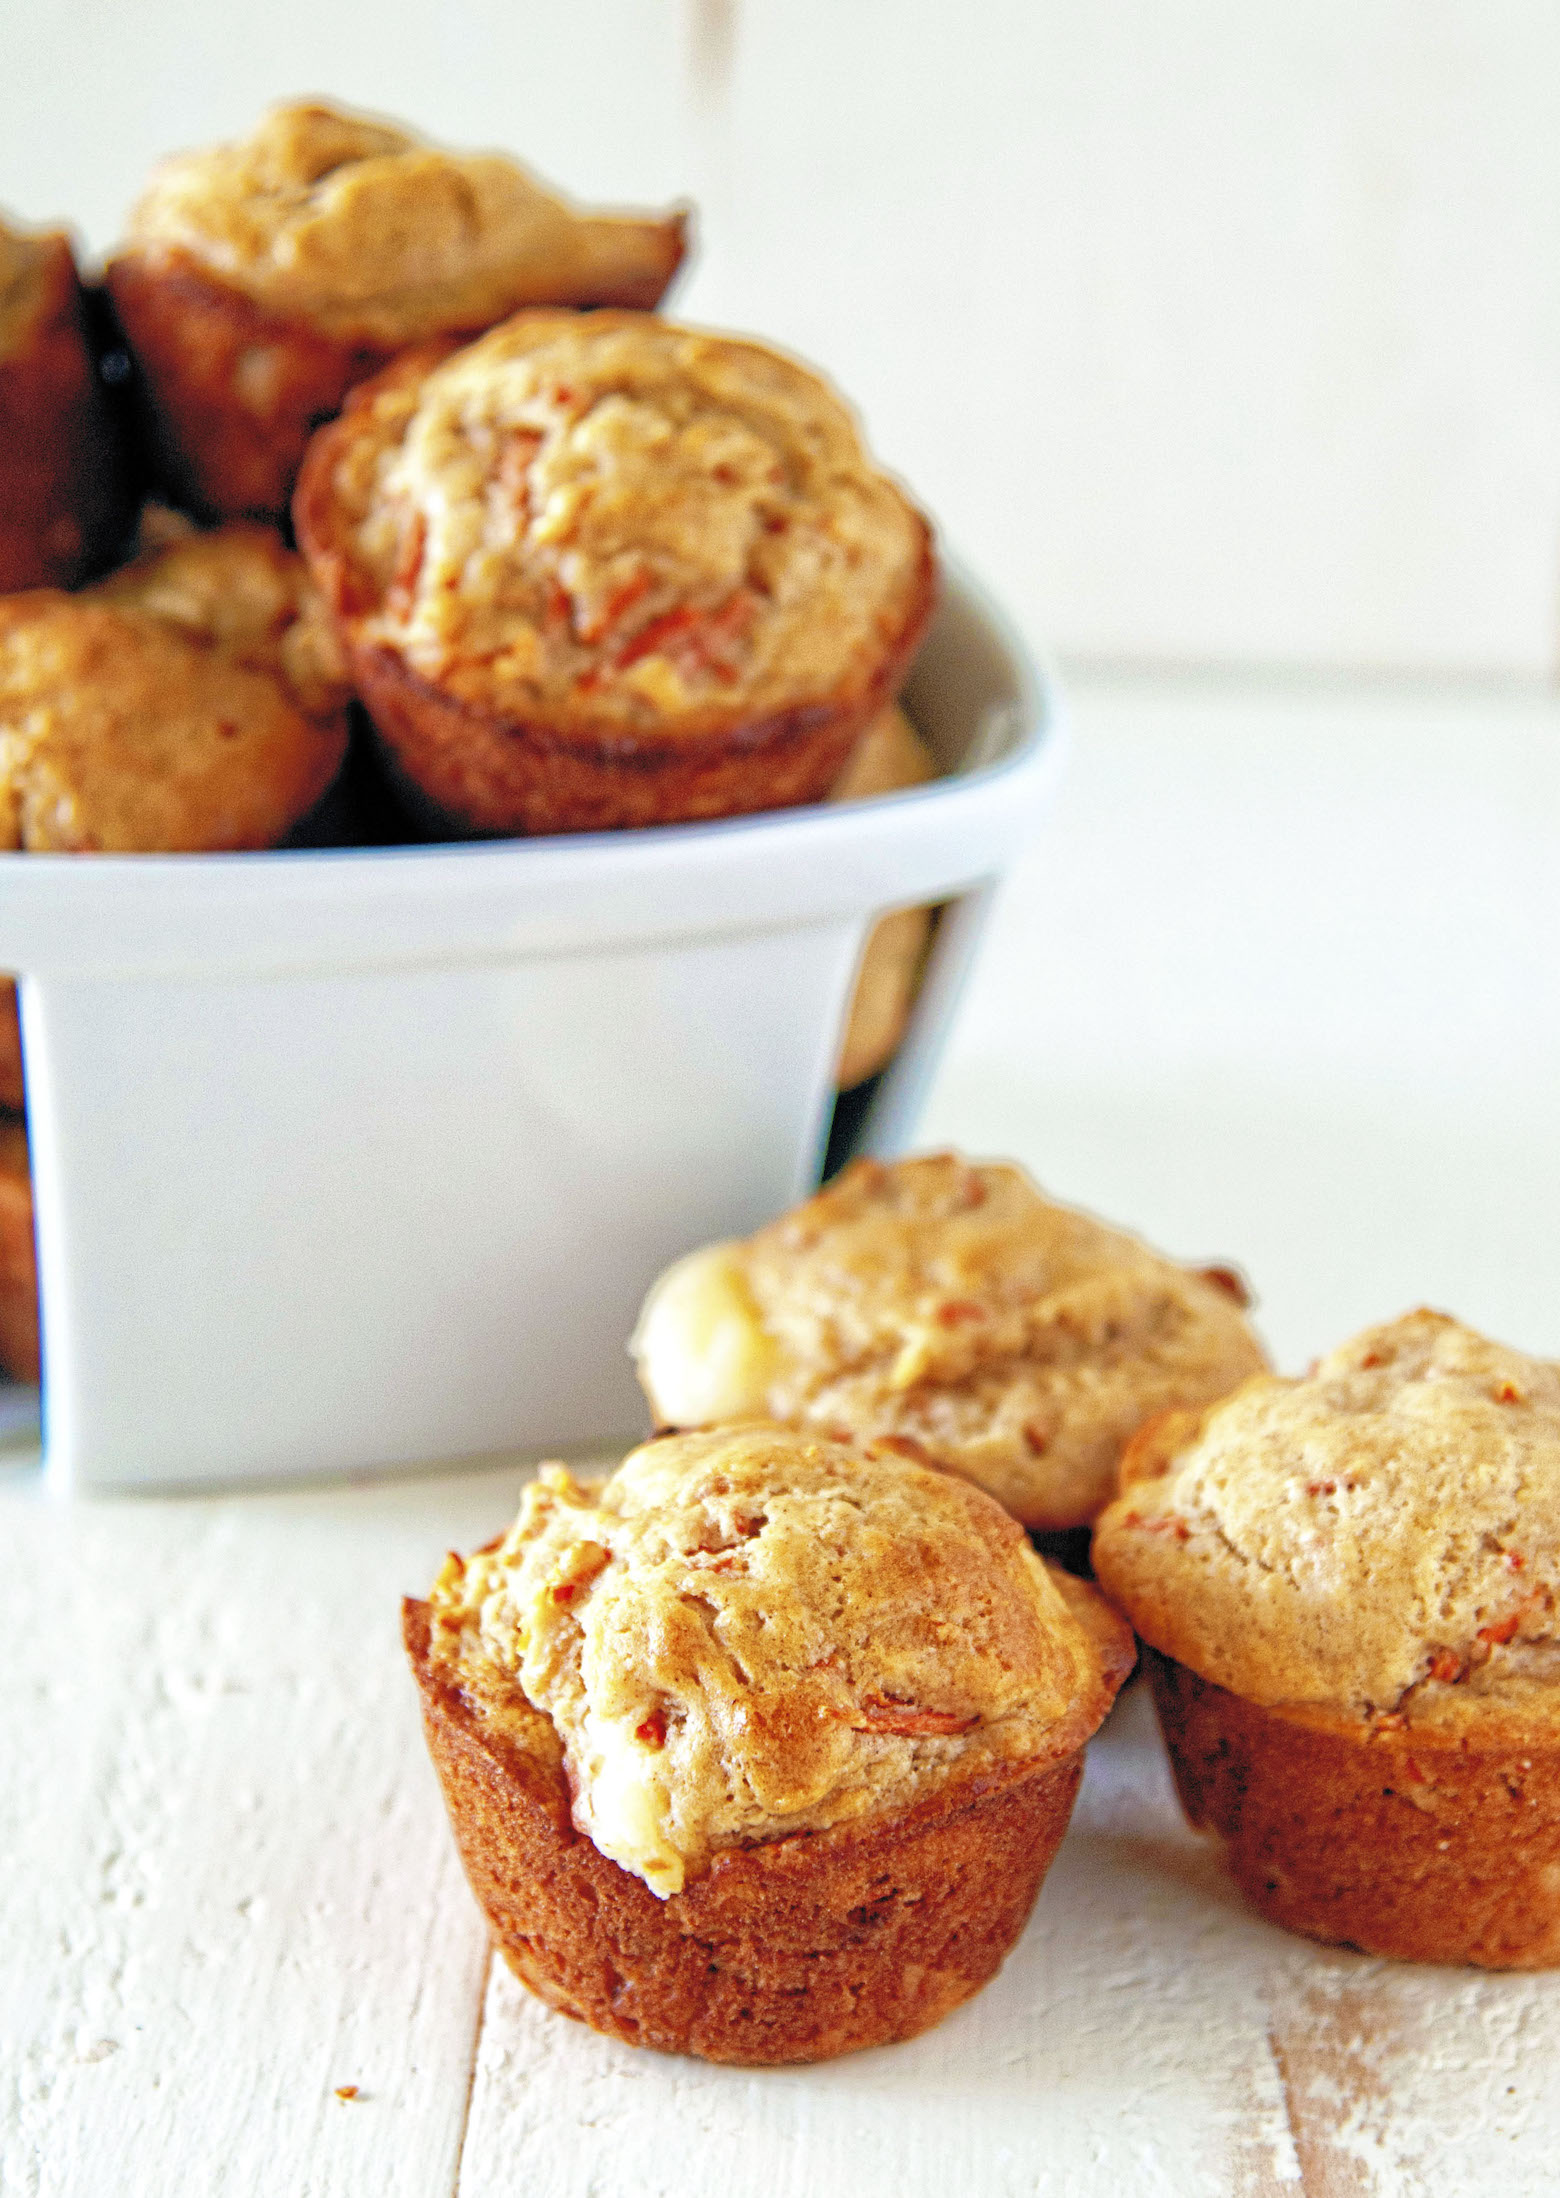 Three muffins in front of a small basket of muffins.